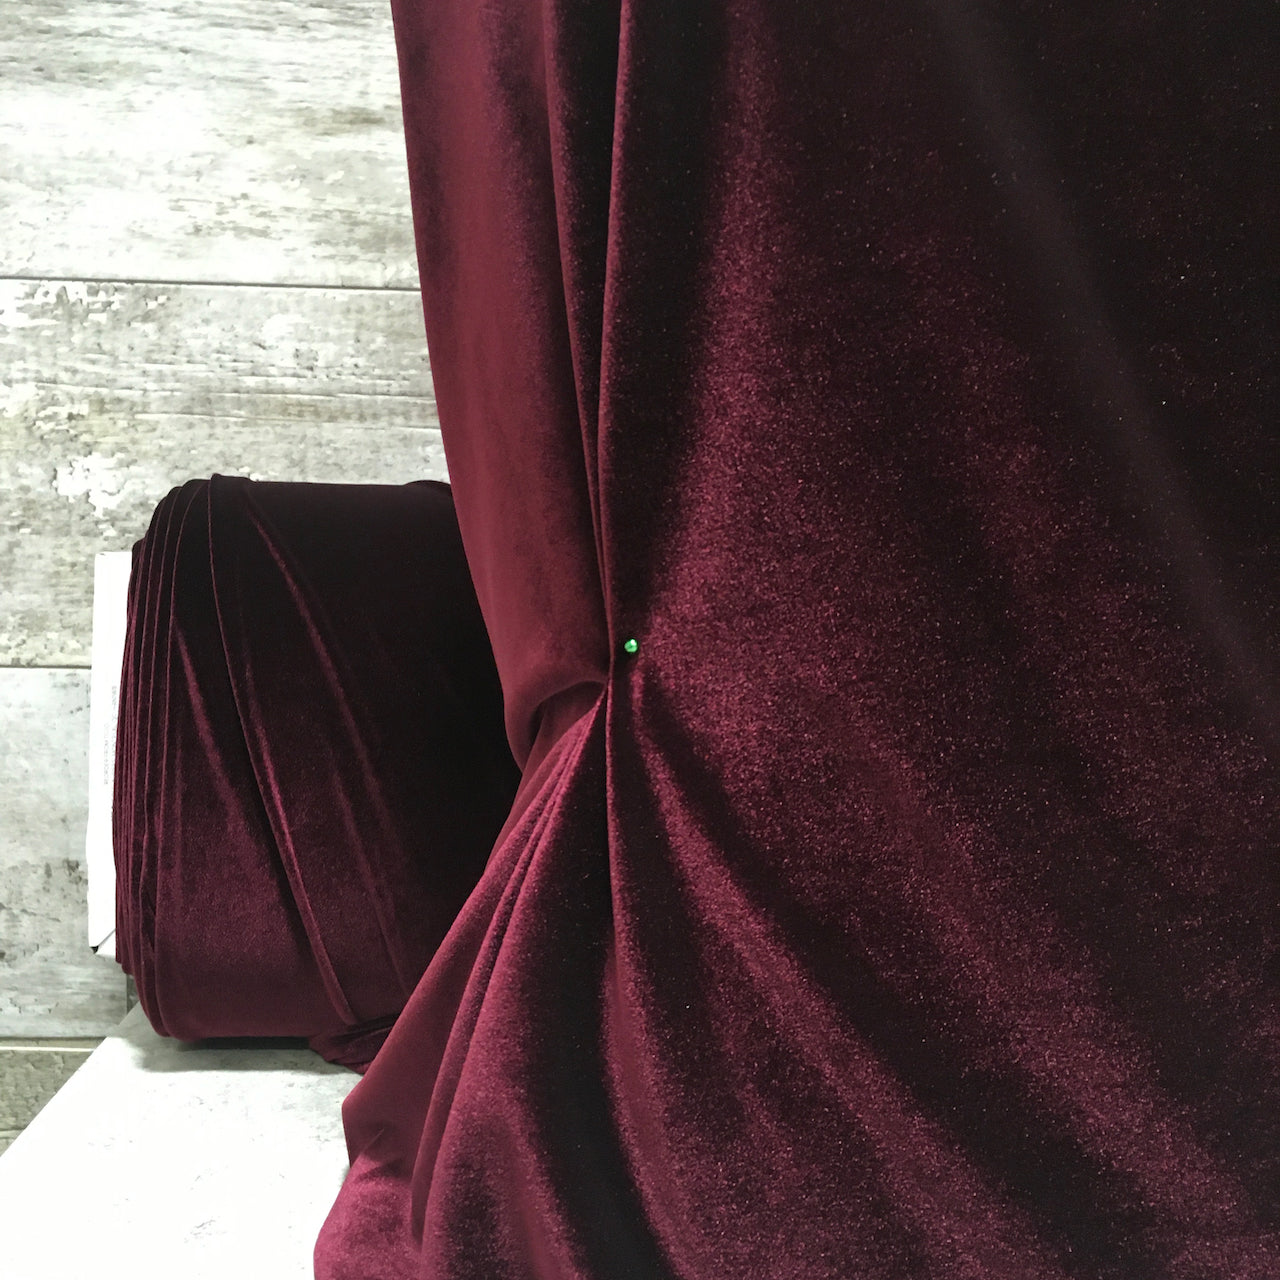 Stretch Panne Velvet Velour Red, Fabric by the Yard